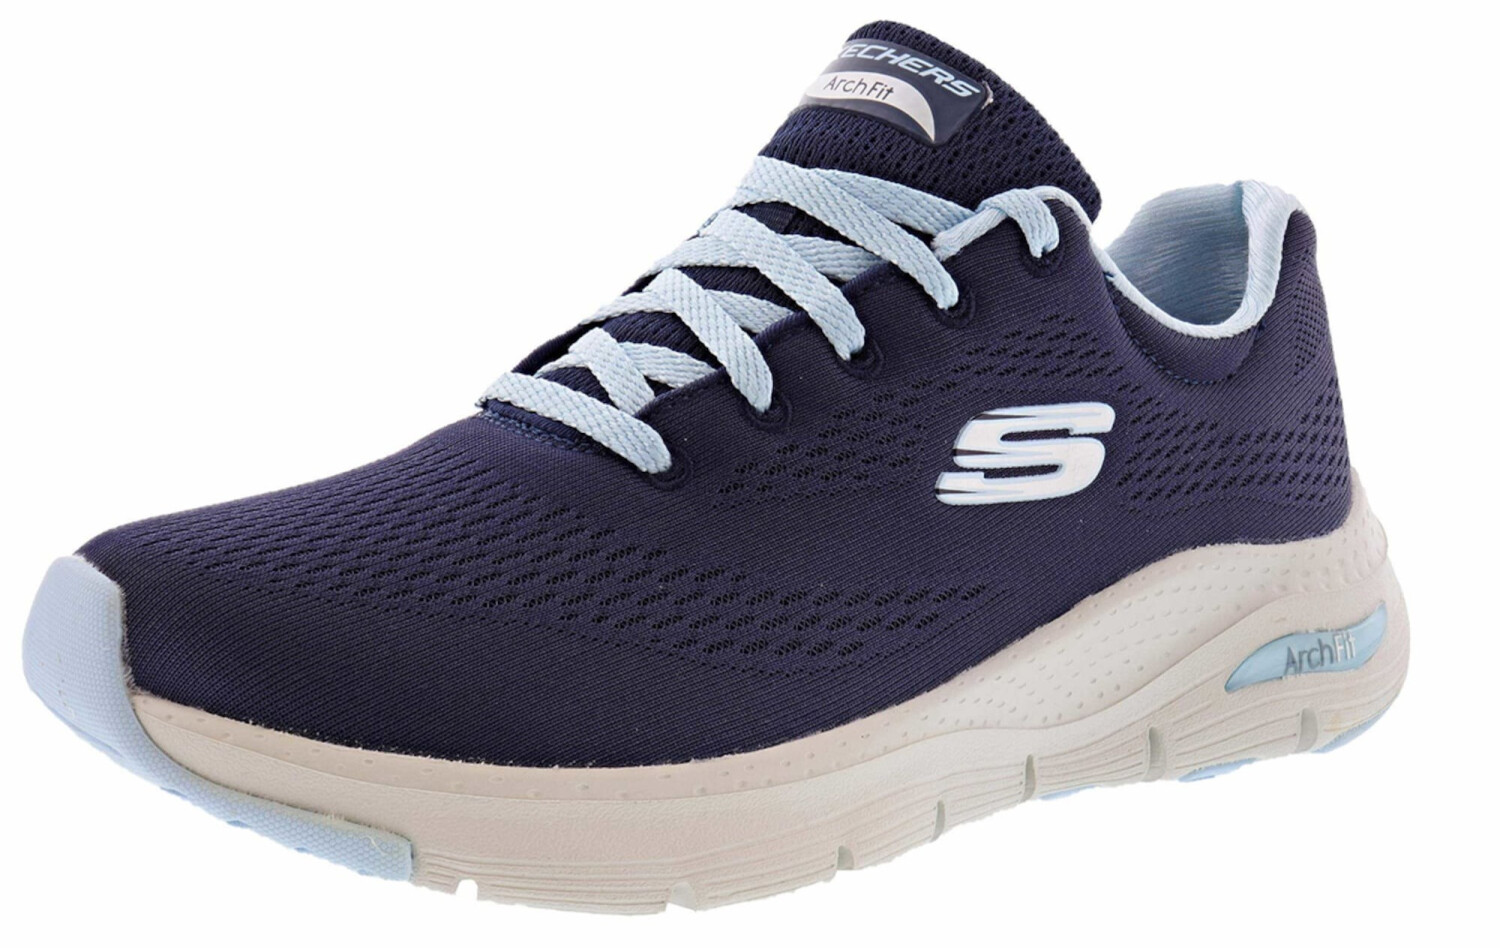 Buy Skechers Arch Fit - Sunny Outlook navy/light blue from £61.95 ...